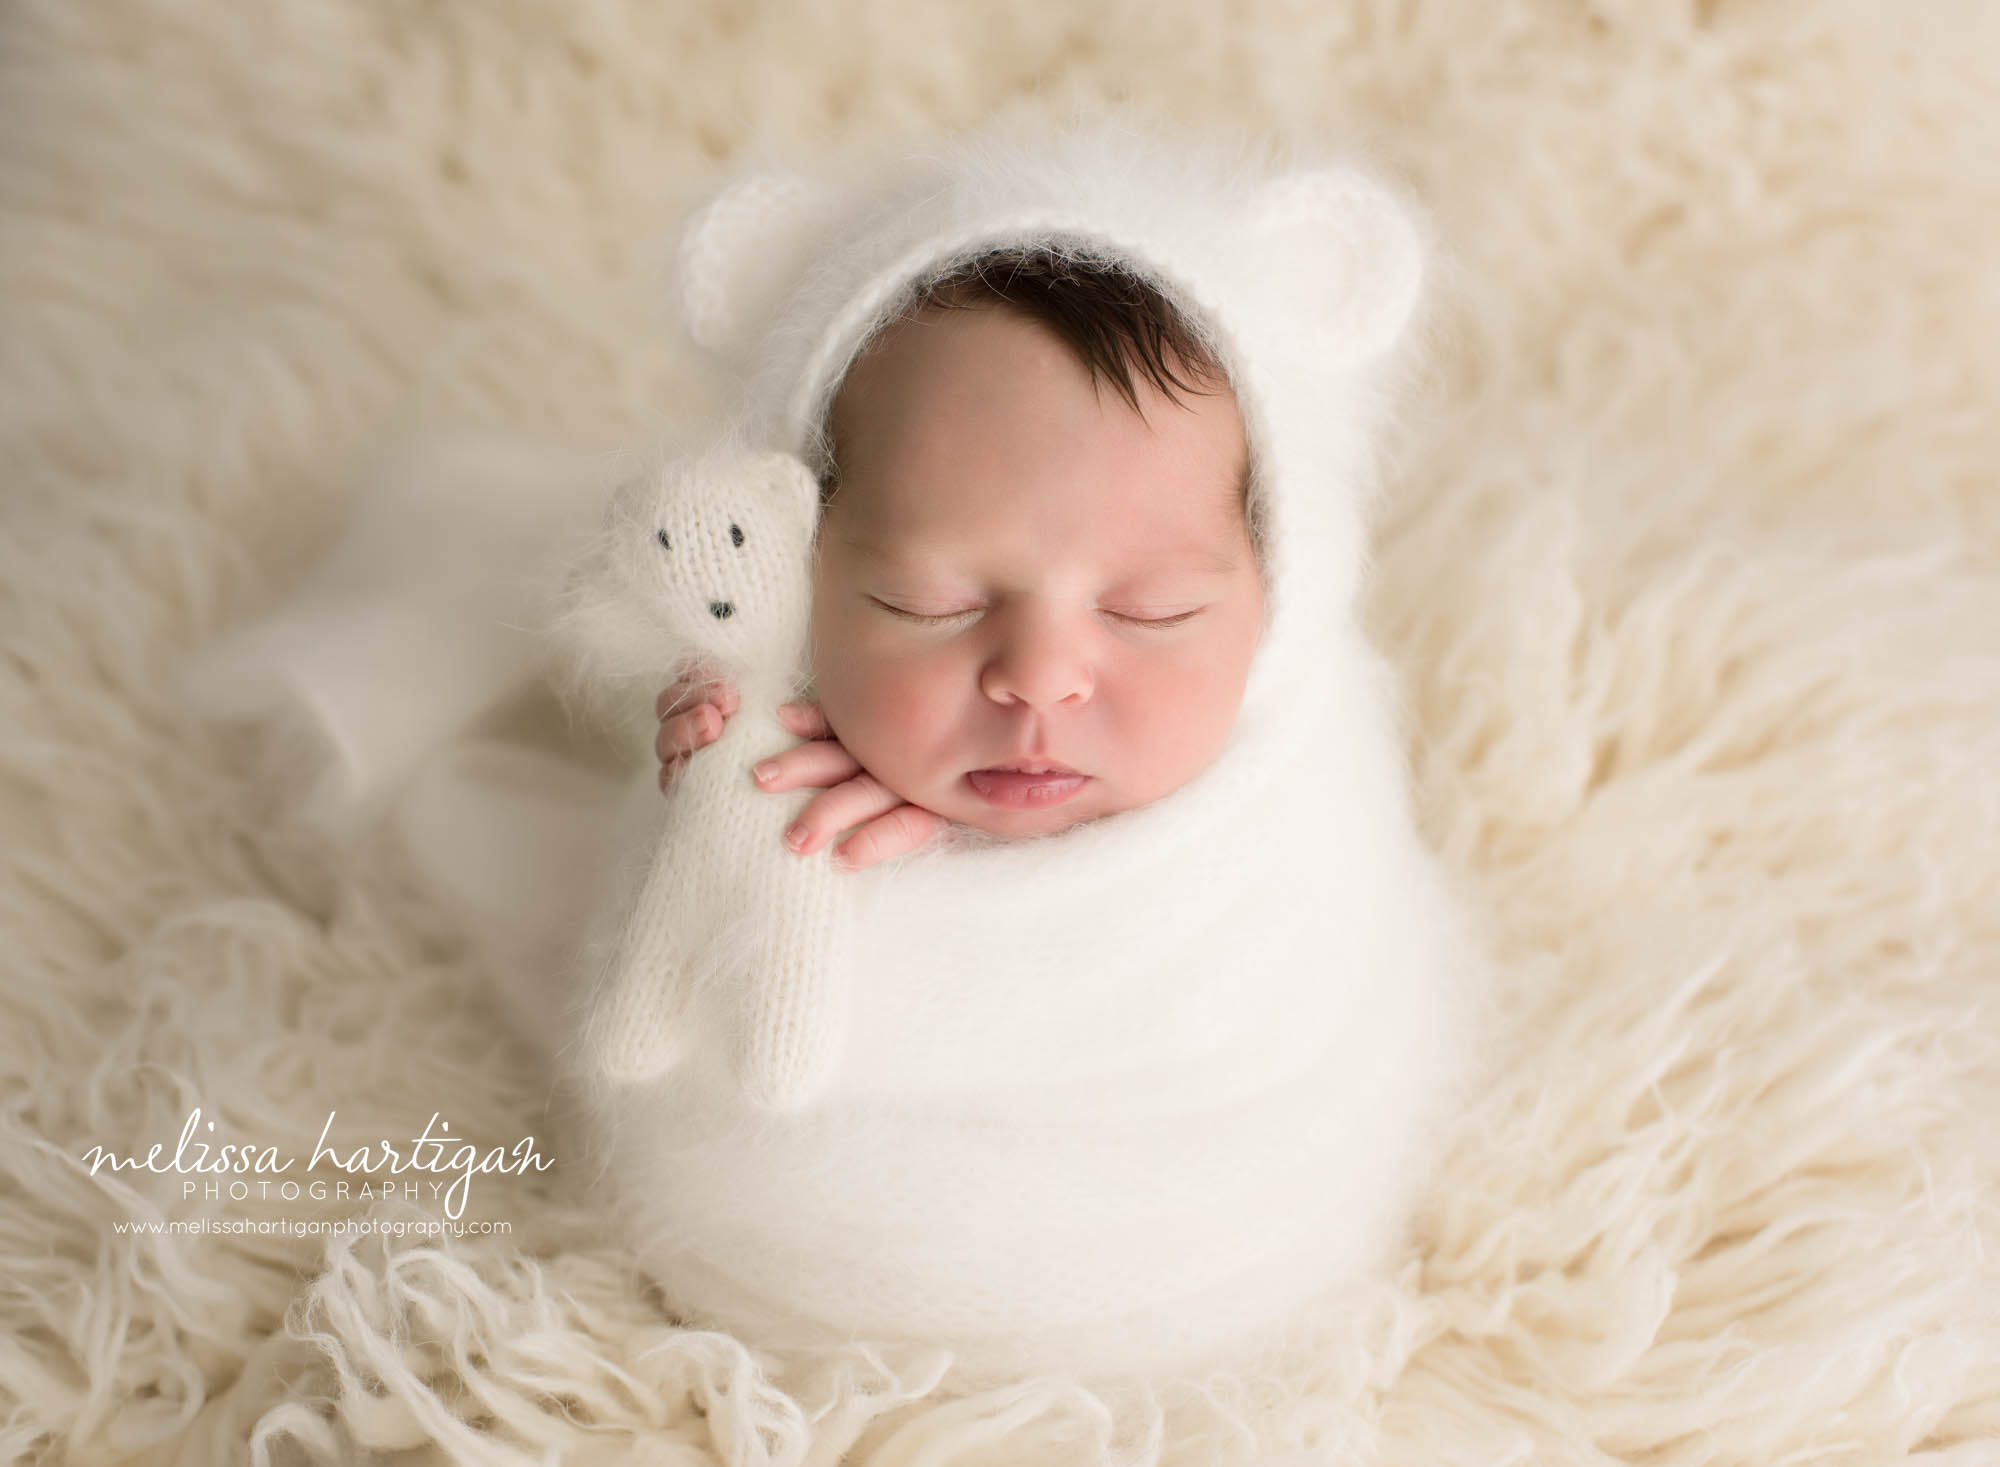 newborn baby boy wrapped in white knitted layer wrap with matching bear bonnet and teddy bear